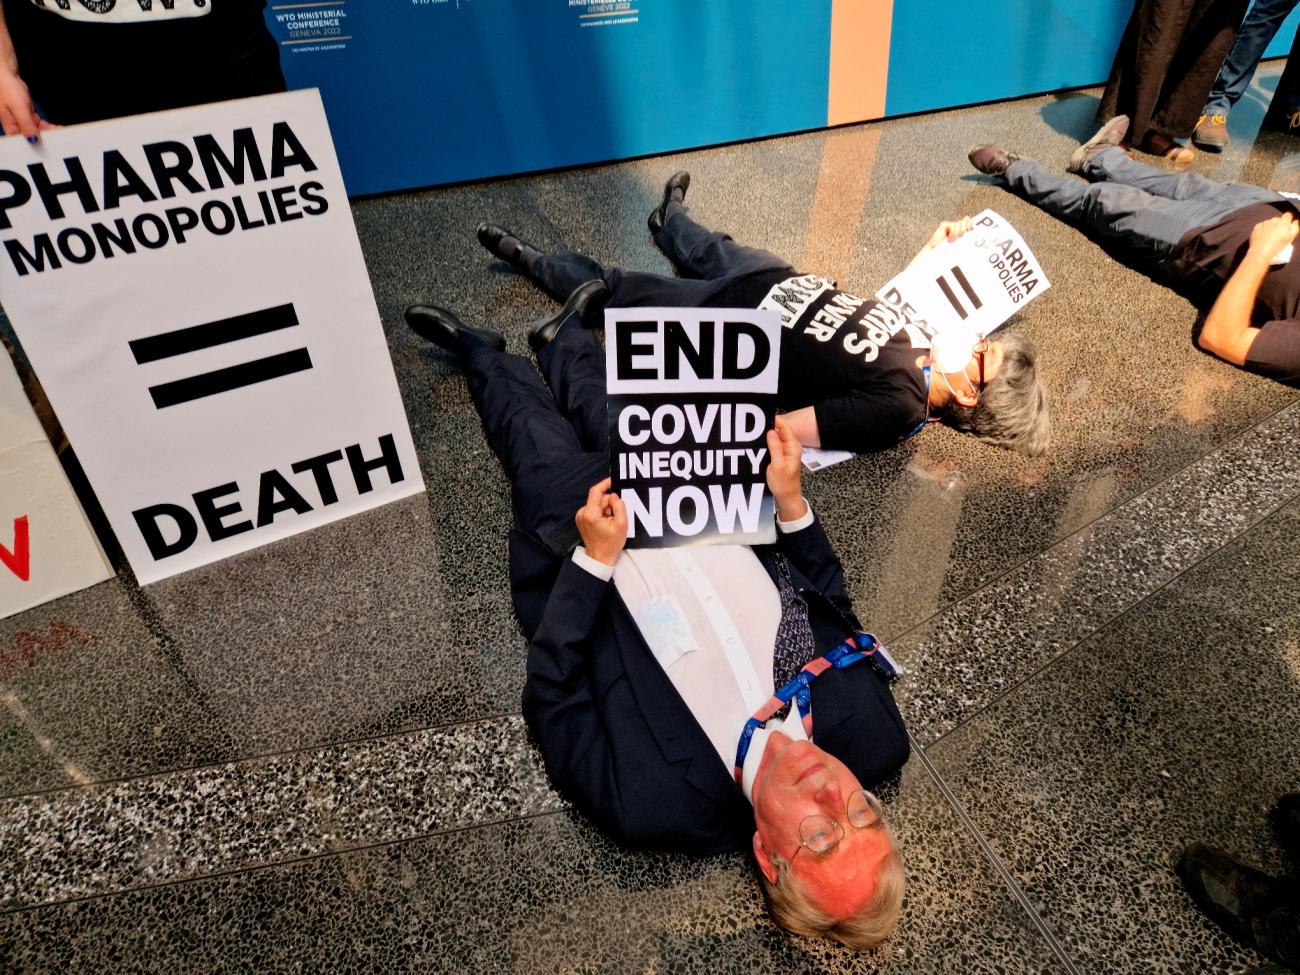 Civil society groups perform "die-in" protest over WTO negotiations on compromise that they say does not go far enough in allowing developing countries to produce COVID-19 vaccines.